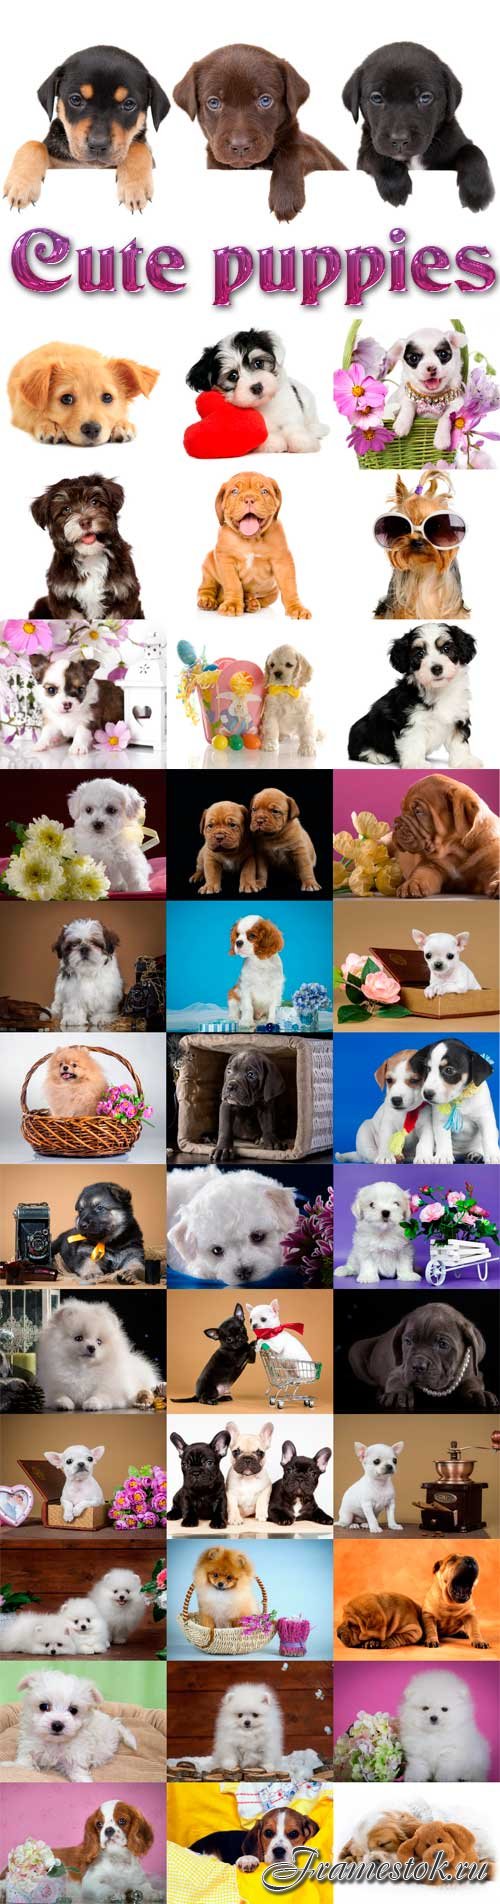 Cute puppies Raster Graphics